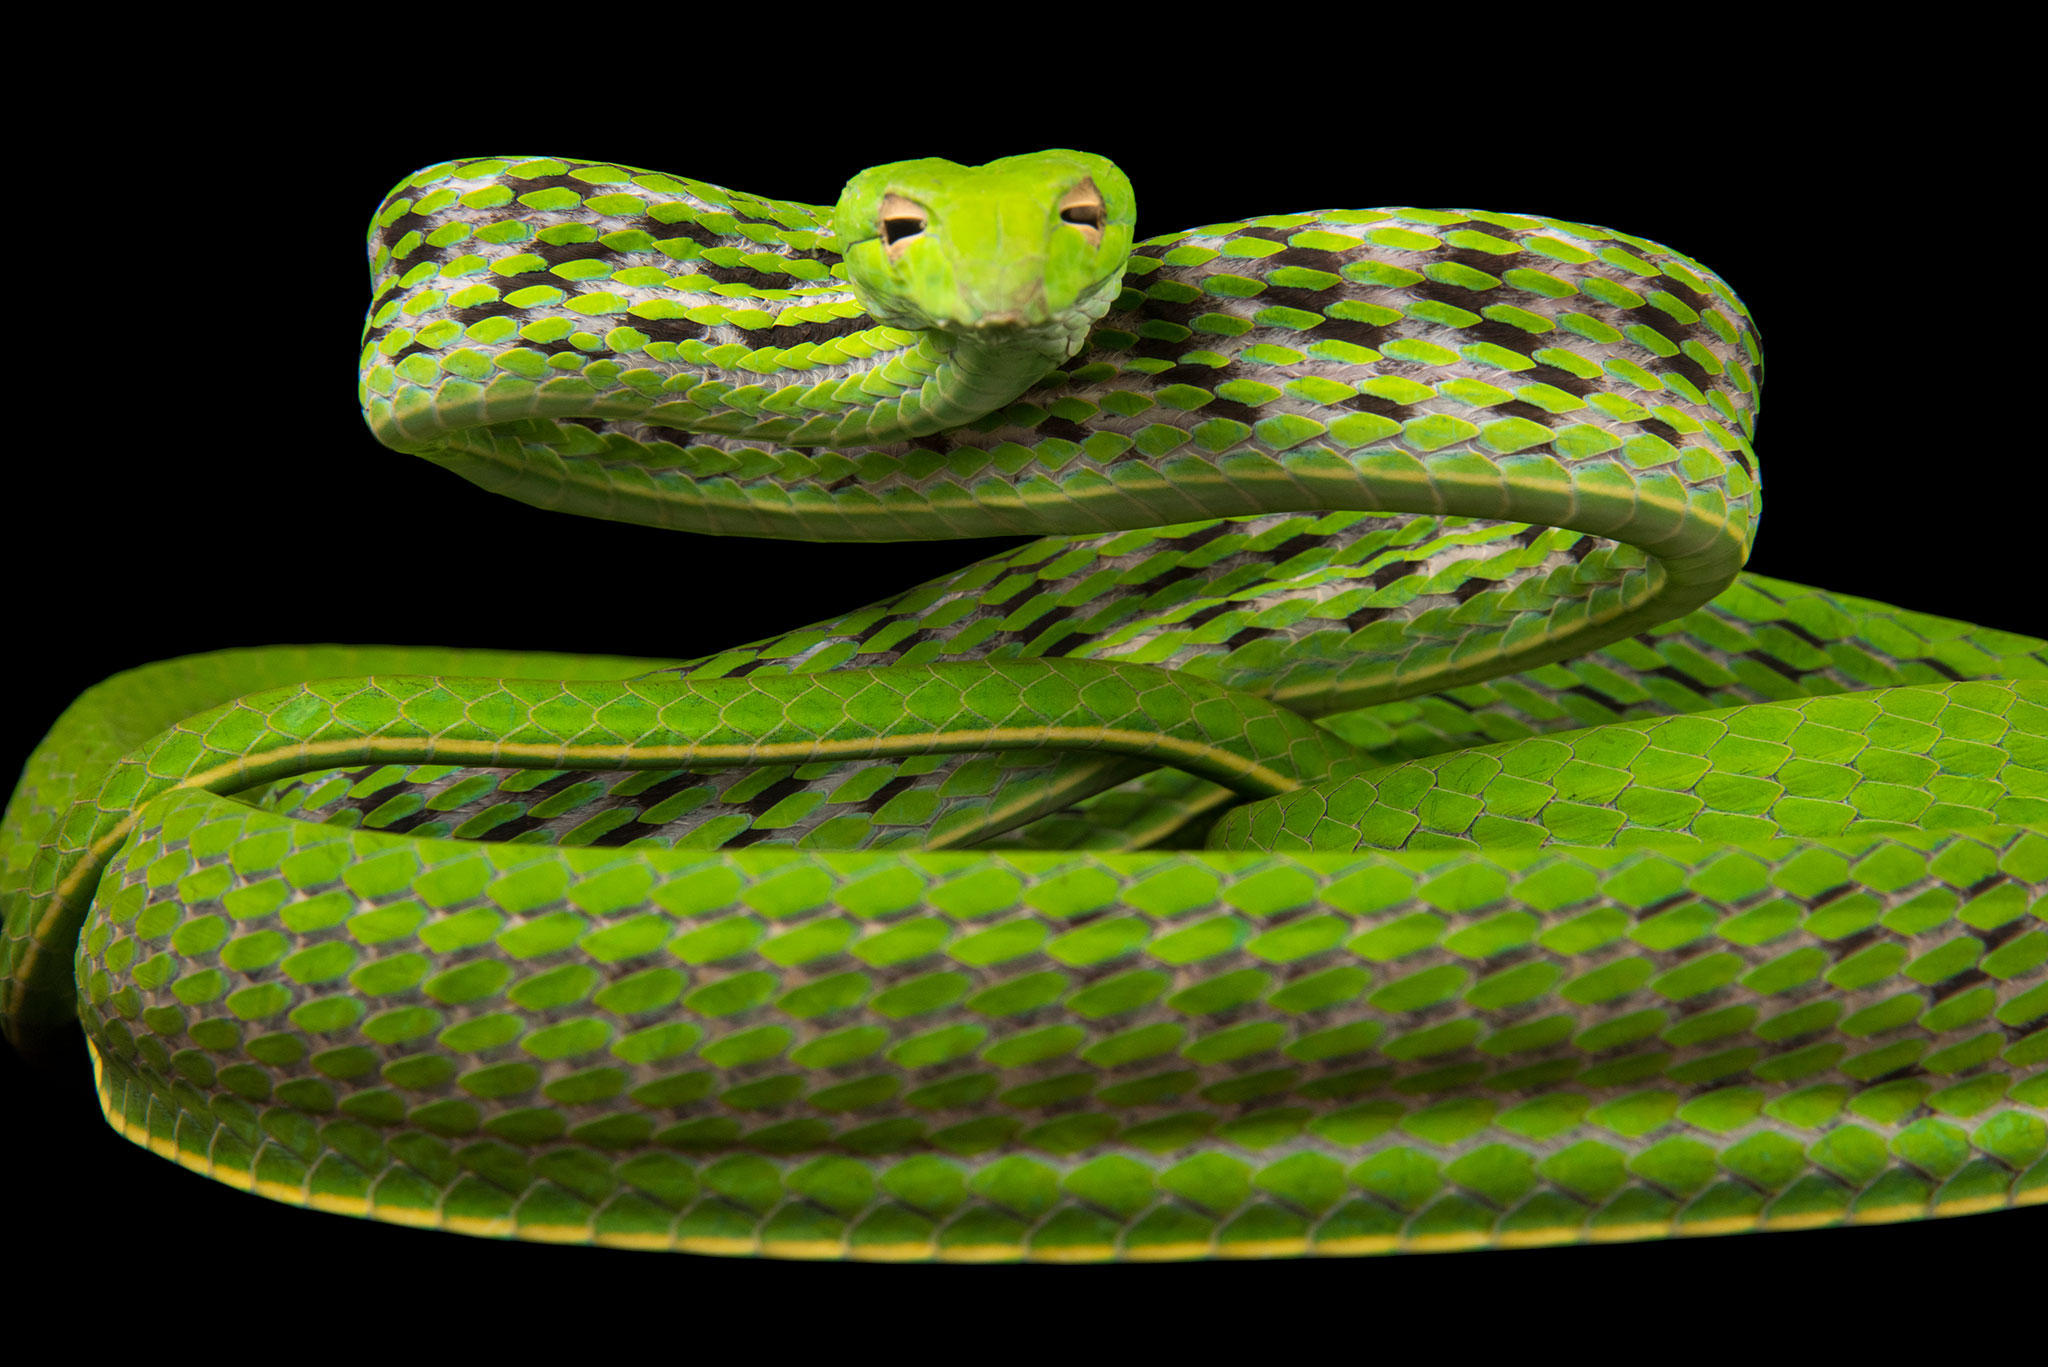 See 22 Spectacular Pictures of Snakes